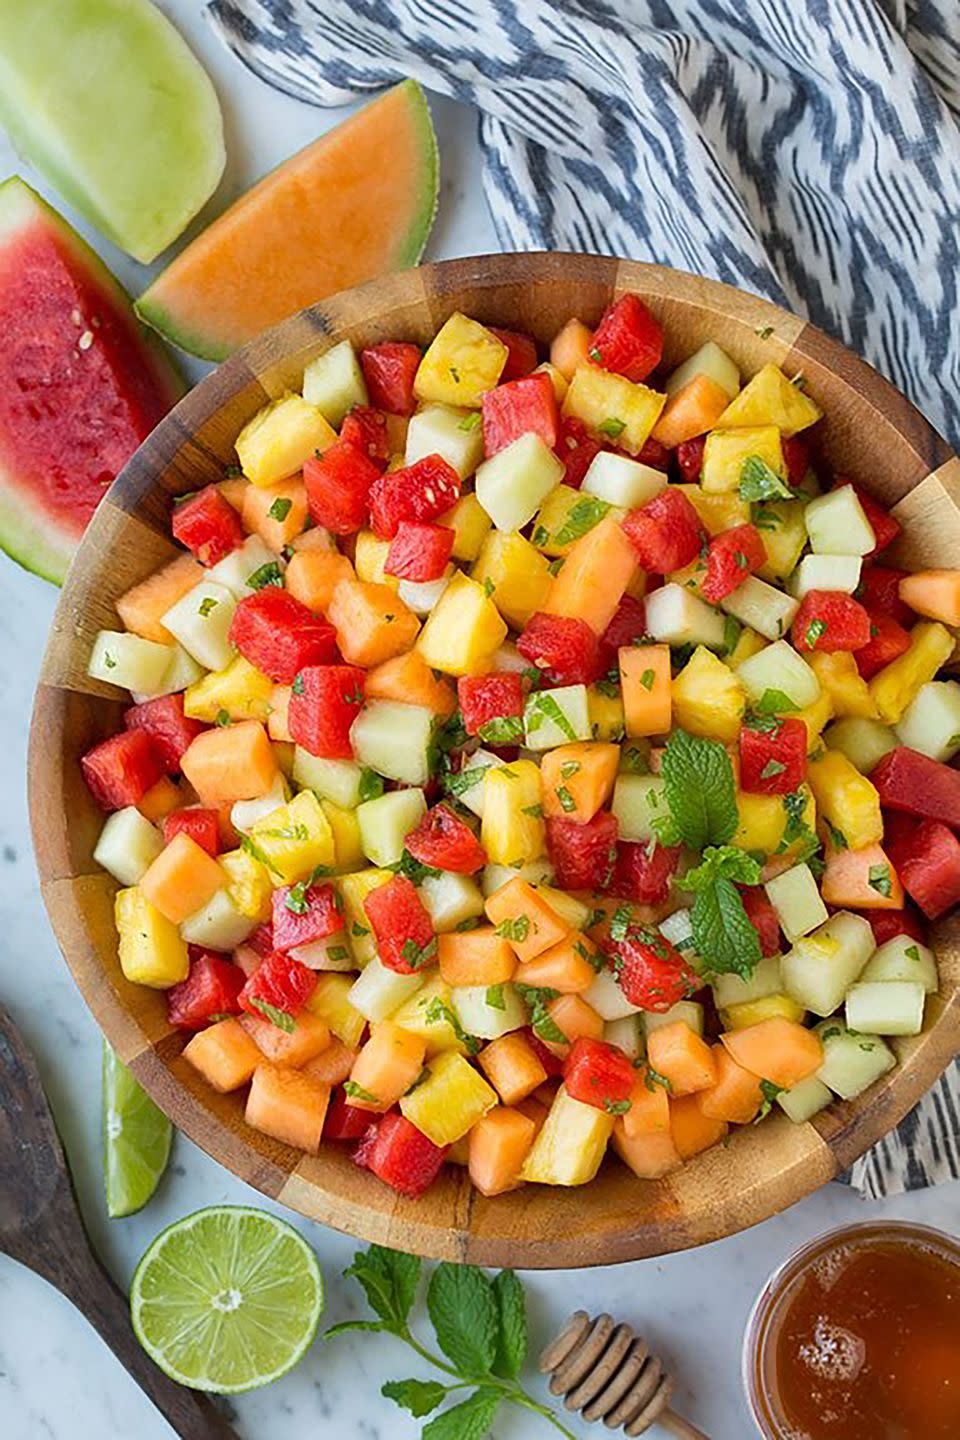 16 Fruit Salad Recipes You Need to Make This Summer